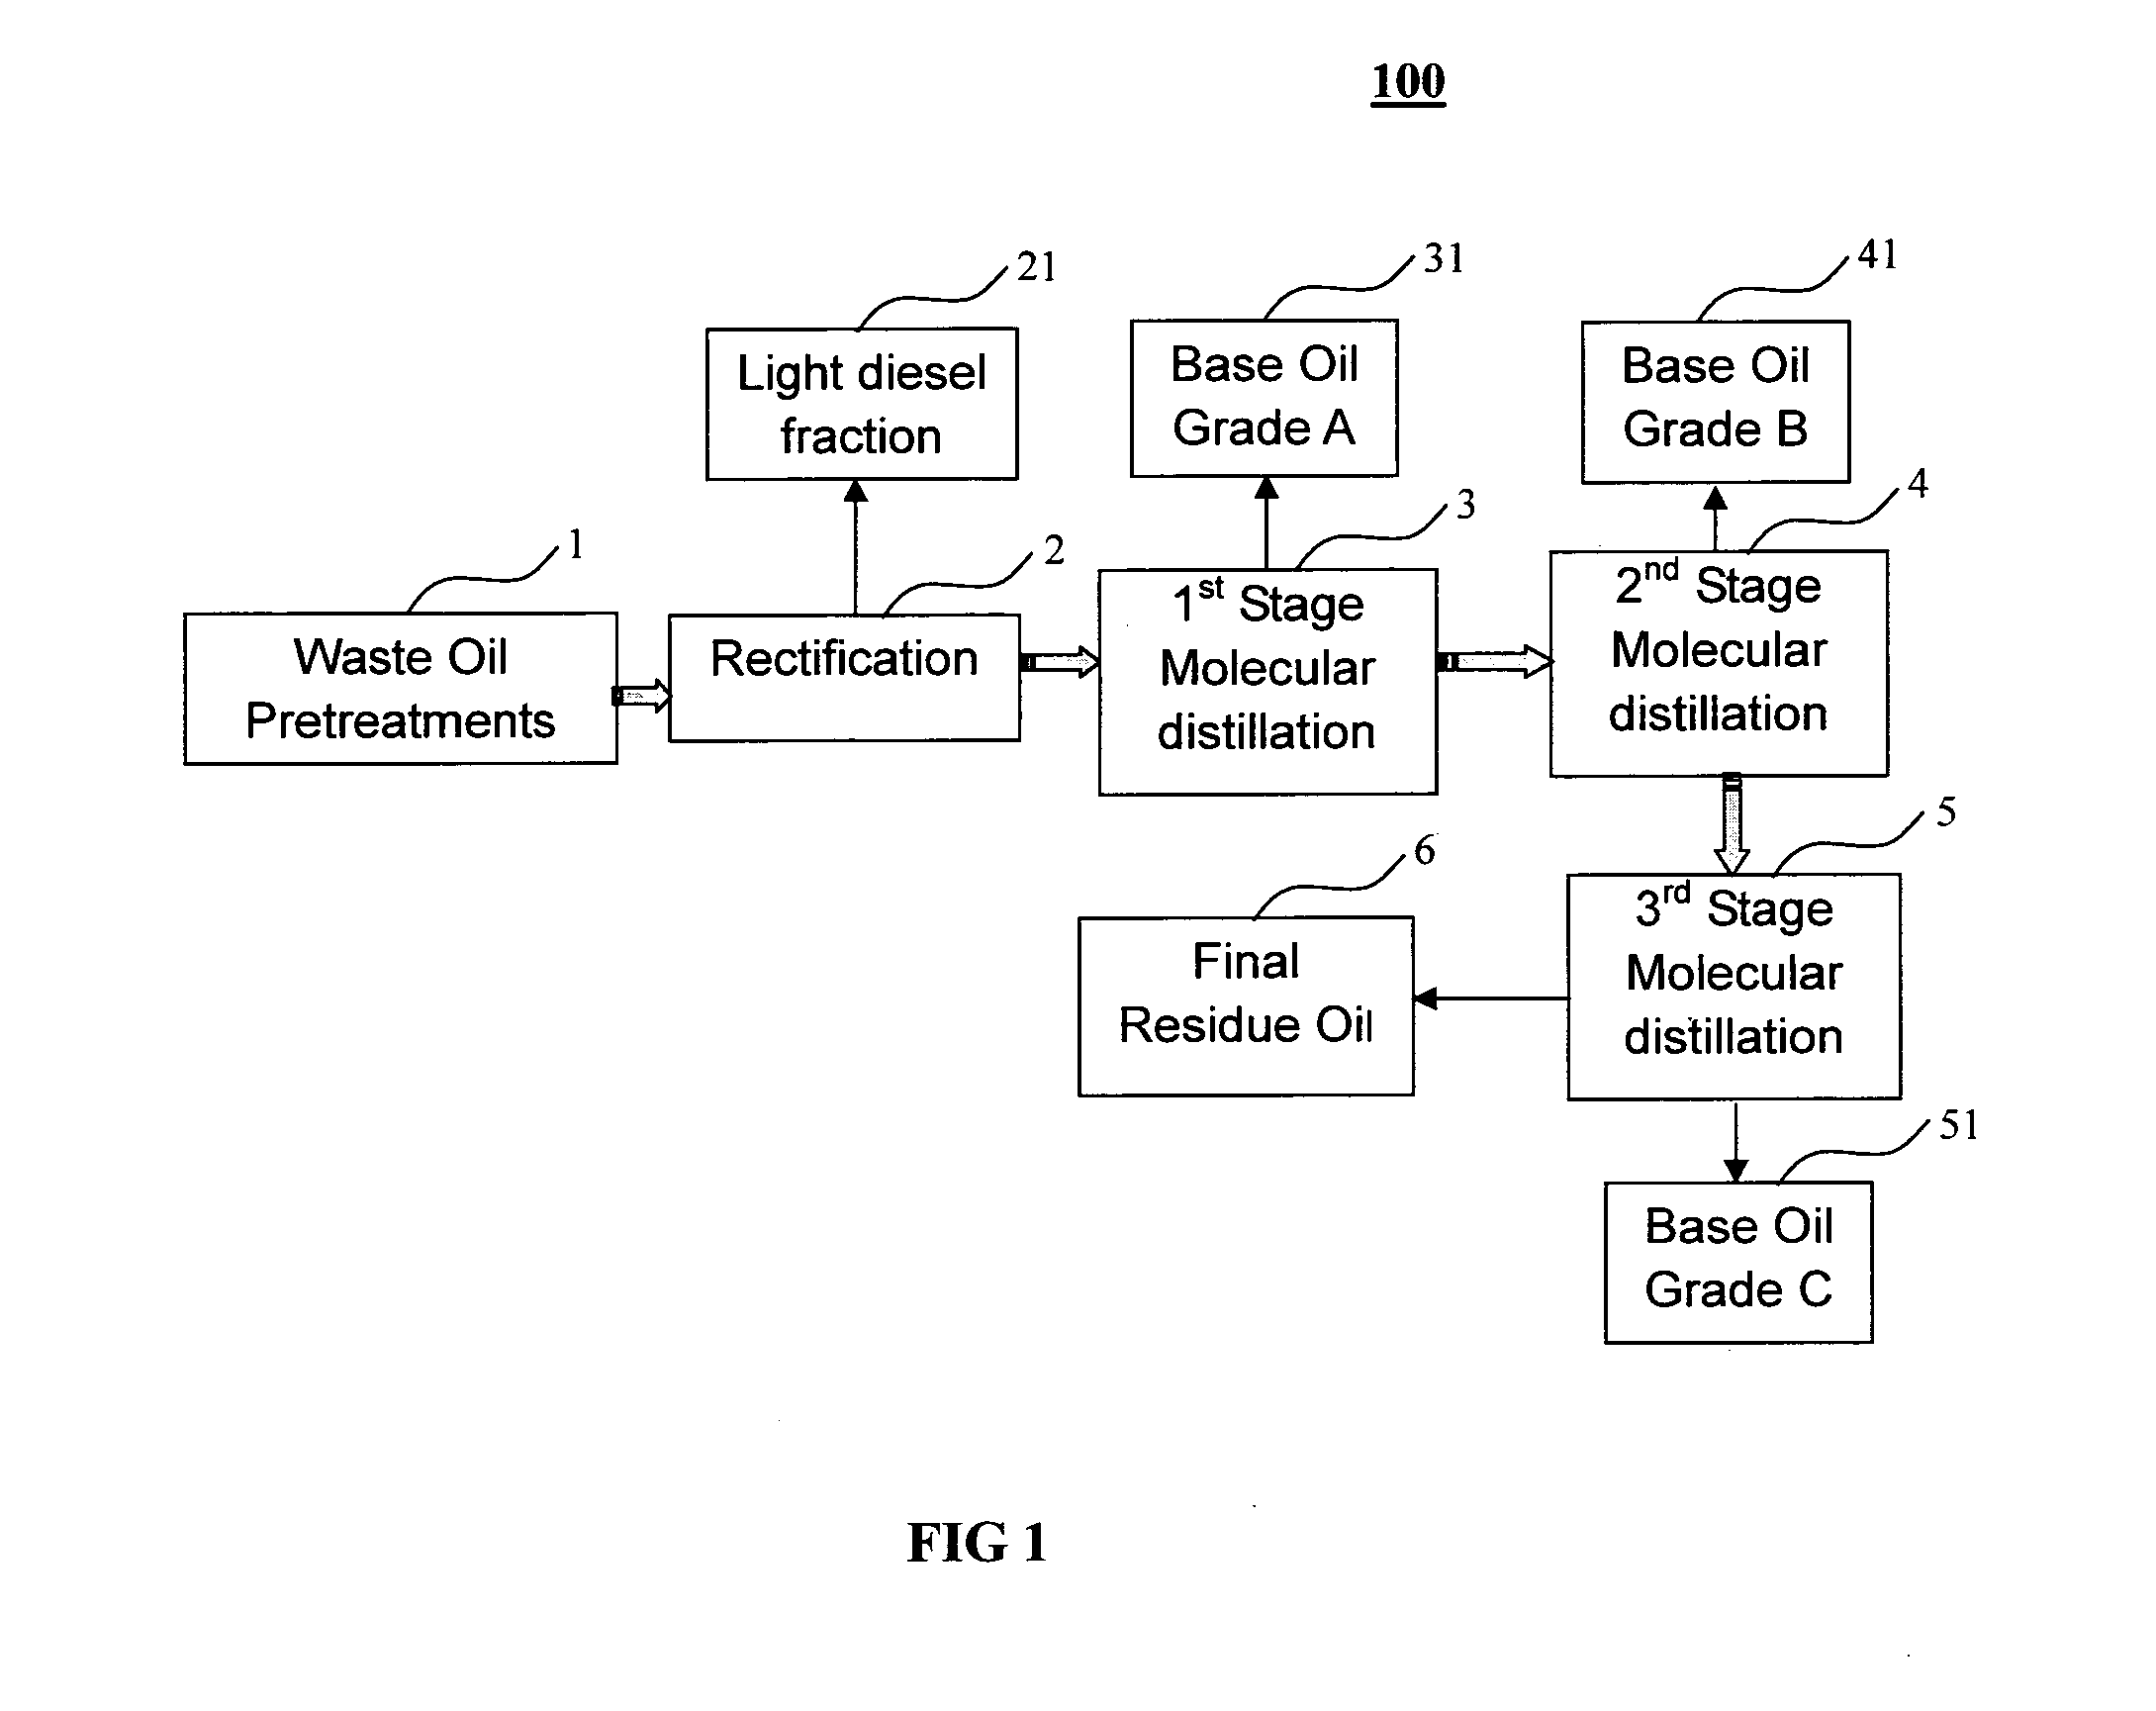 Process and system for recovering base oil from lubrication oil that contains contaminants therein